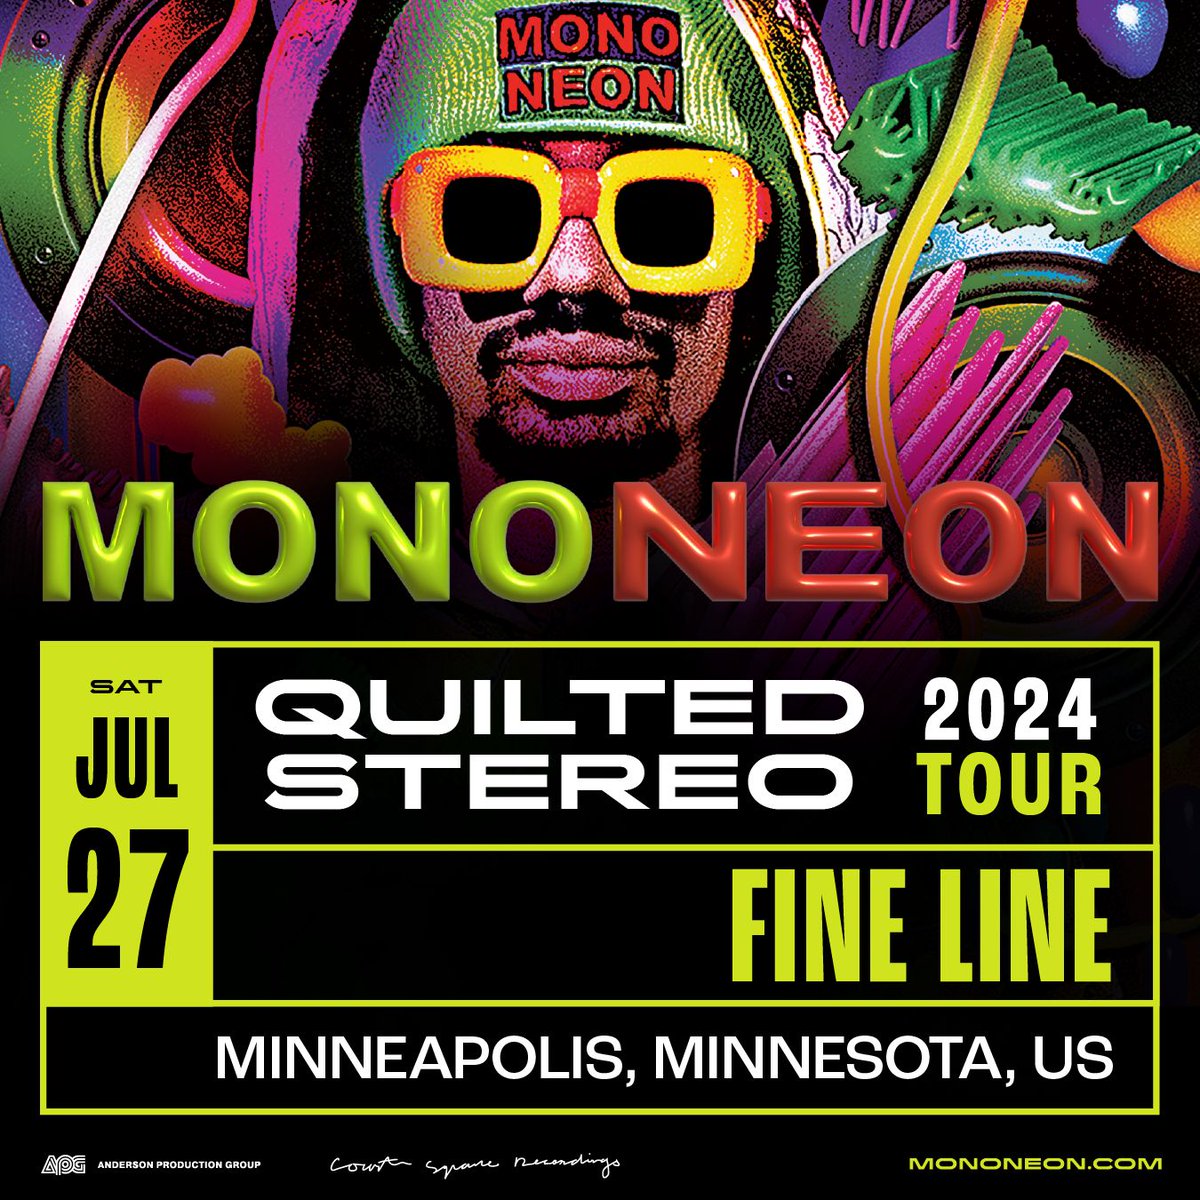 Just Announced: @MonoNeon at the Fine Line on Saturday, July 27. On sale Wednesday → firstavenue.me/3UWmk05